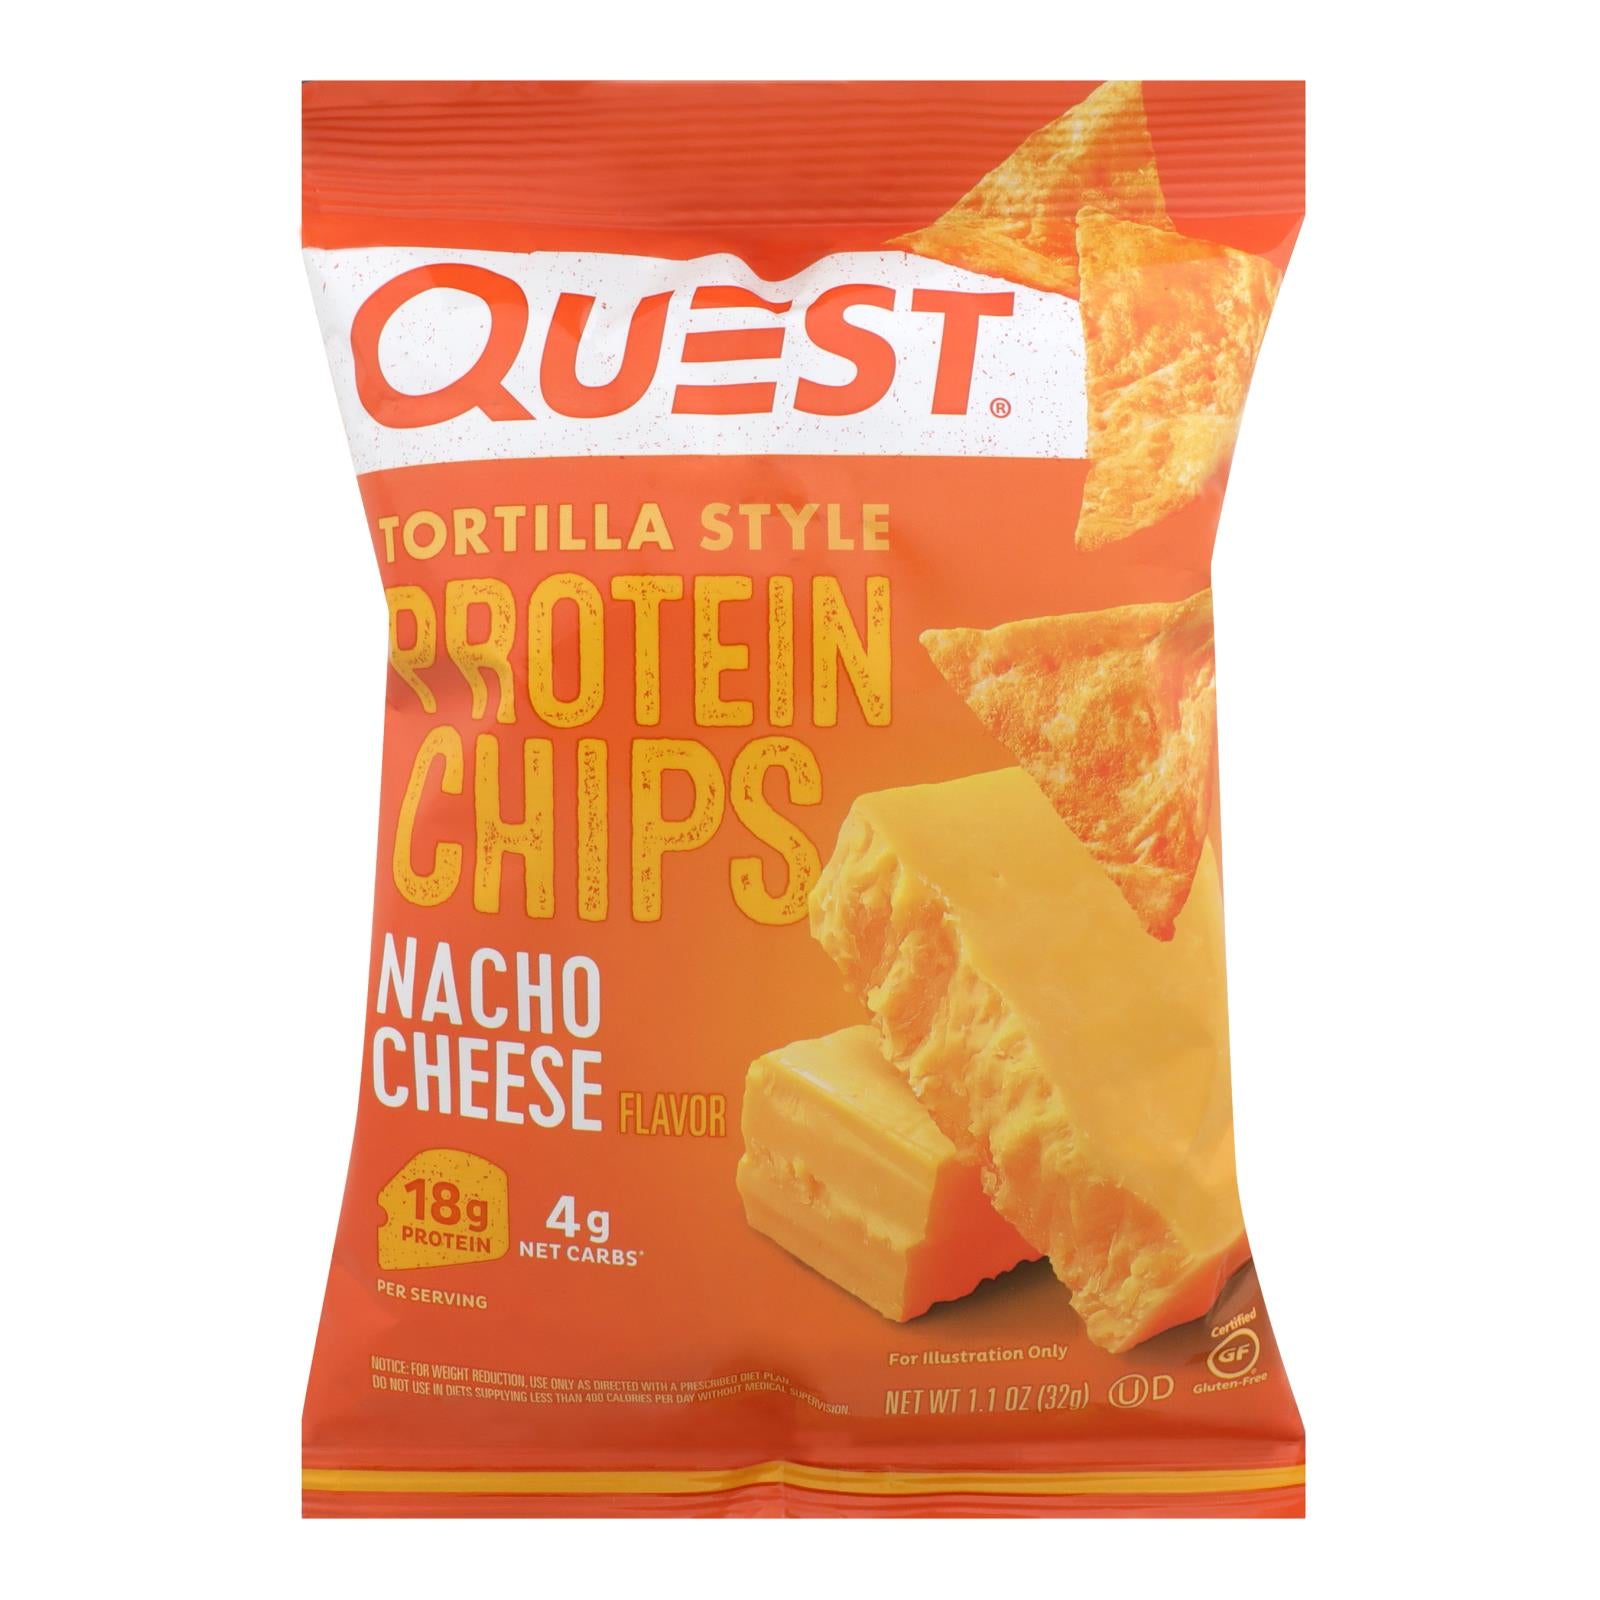 Quest® Nacho Cheese Tortilla Style Protein Chips, Nacho Cheese - Case Of 8 - 1.1 Oz